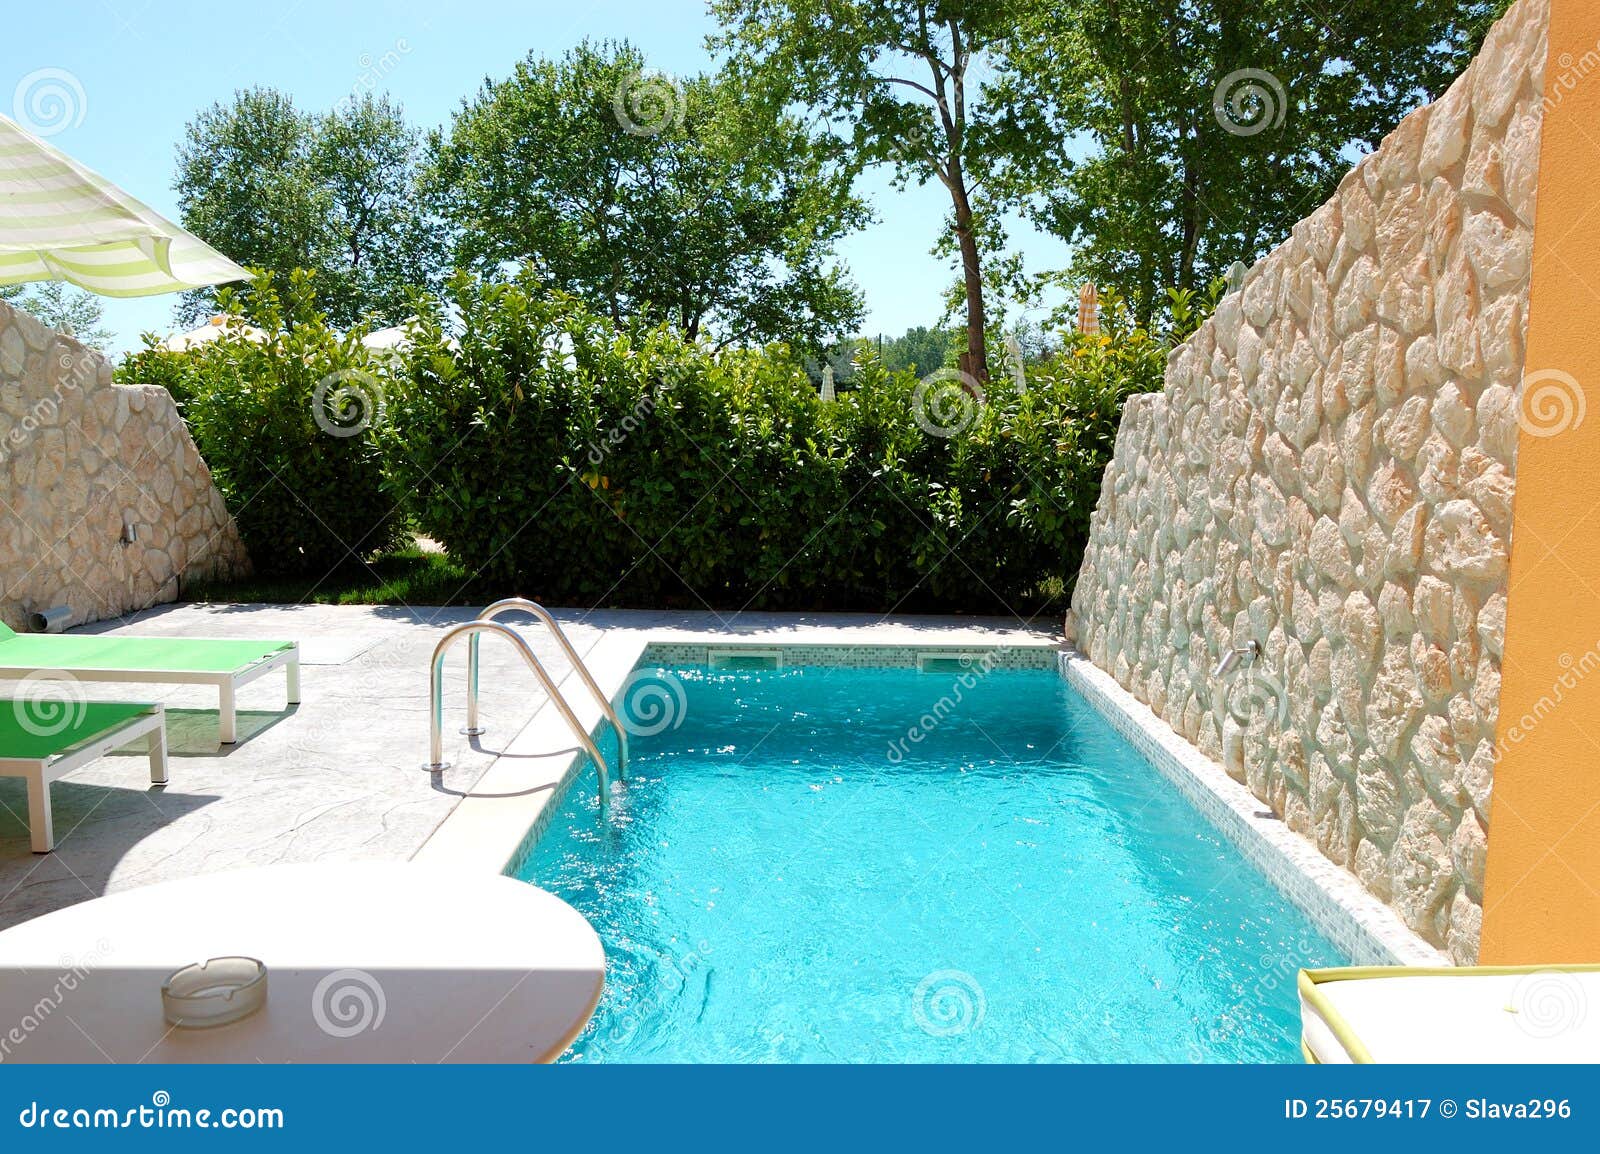 Outdoor Swimming Pool At Luxury Villa Royalty Free Stock Photography 